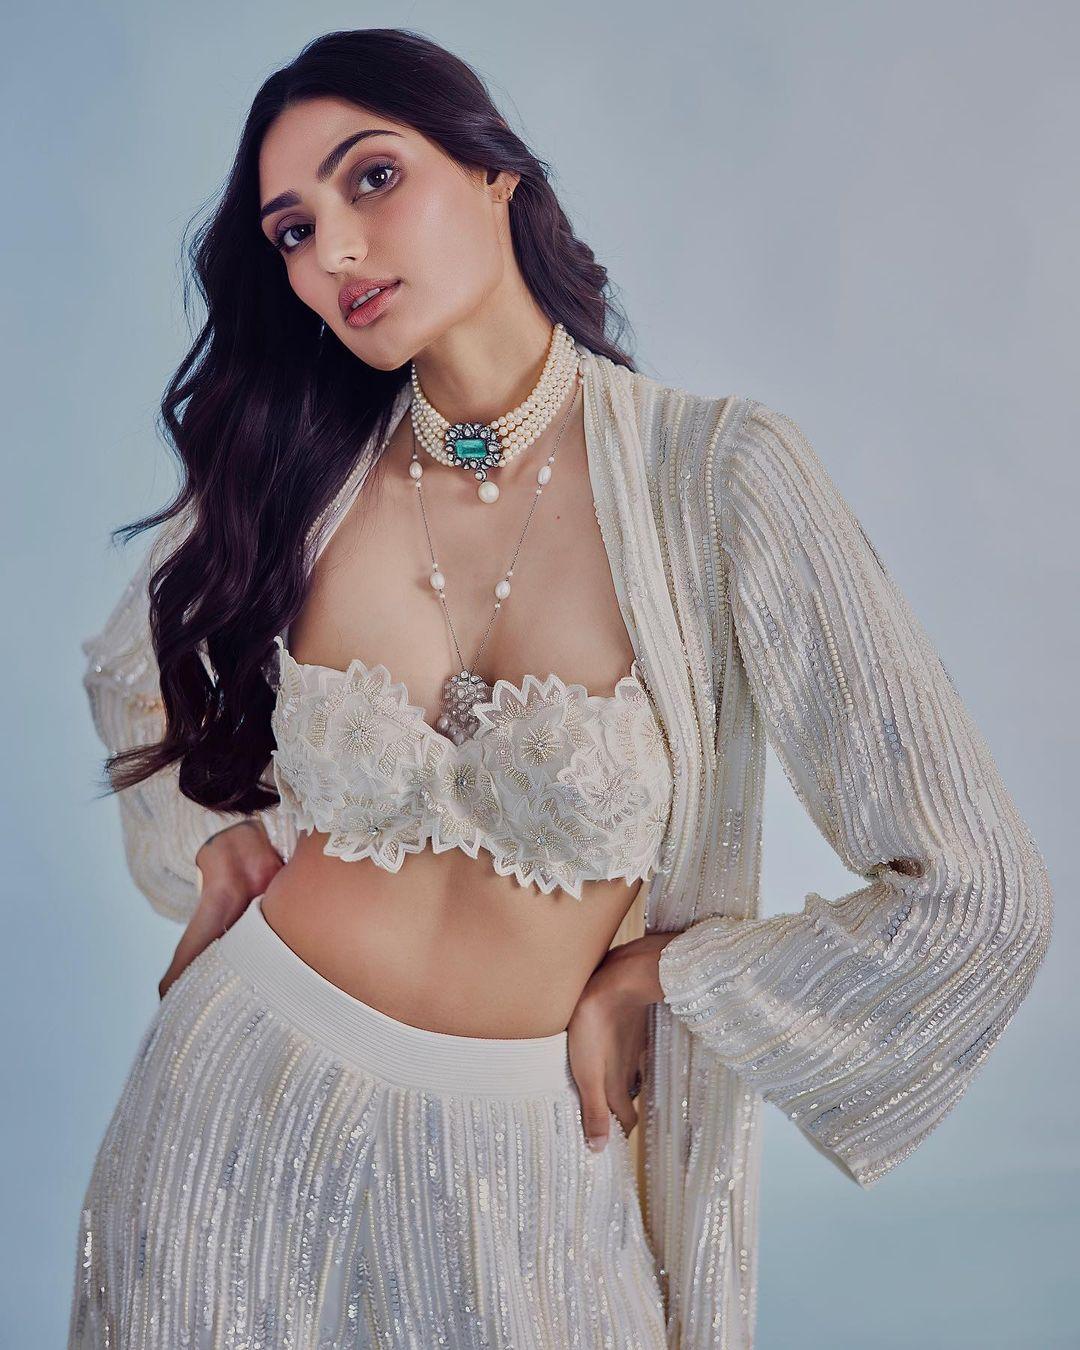 Athiya Shetty appeared gorgeous in a beautiful outfit by Manish Malhotra. She wore a three-piece set in ivory, consisting of a bustier with delicate 3D floral embroidery. 